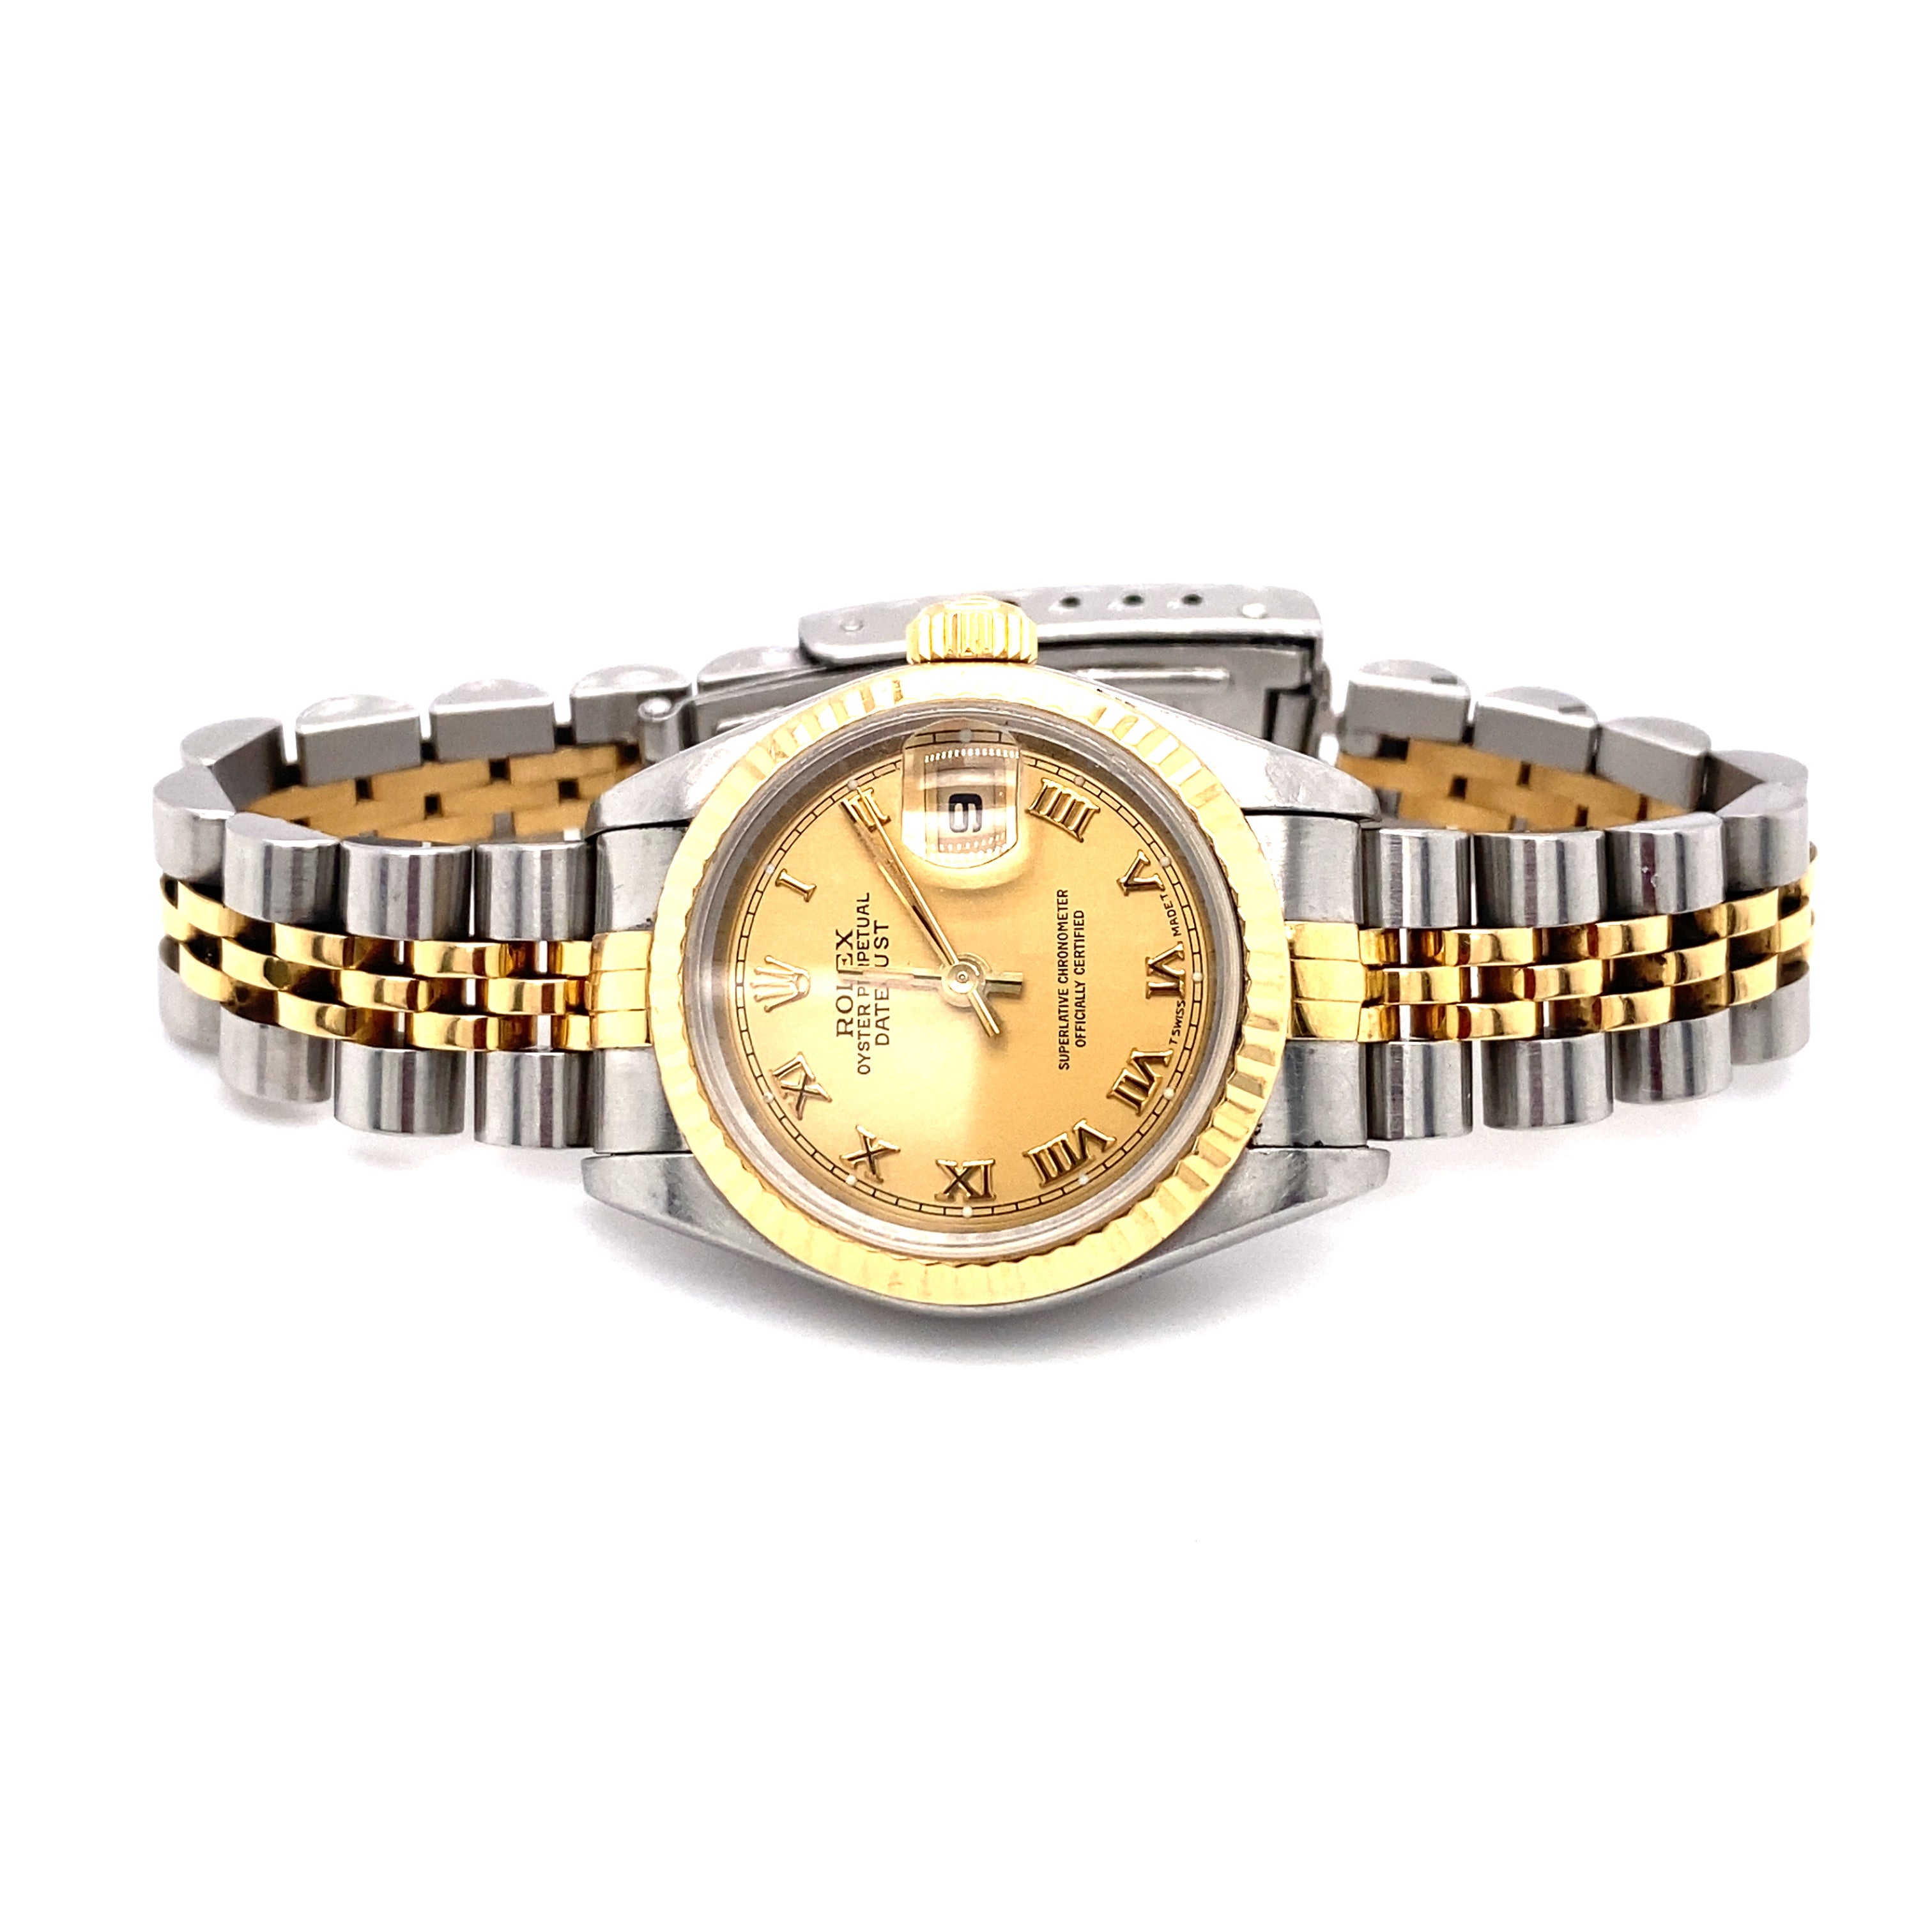 Circa 1995 Rolex Ladies' Watch in Stainless Steel and G - The Verma Group